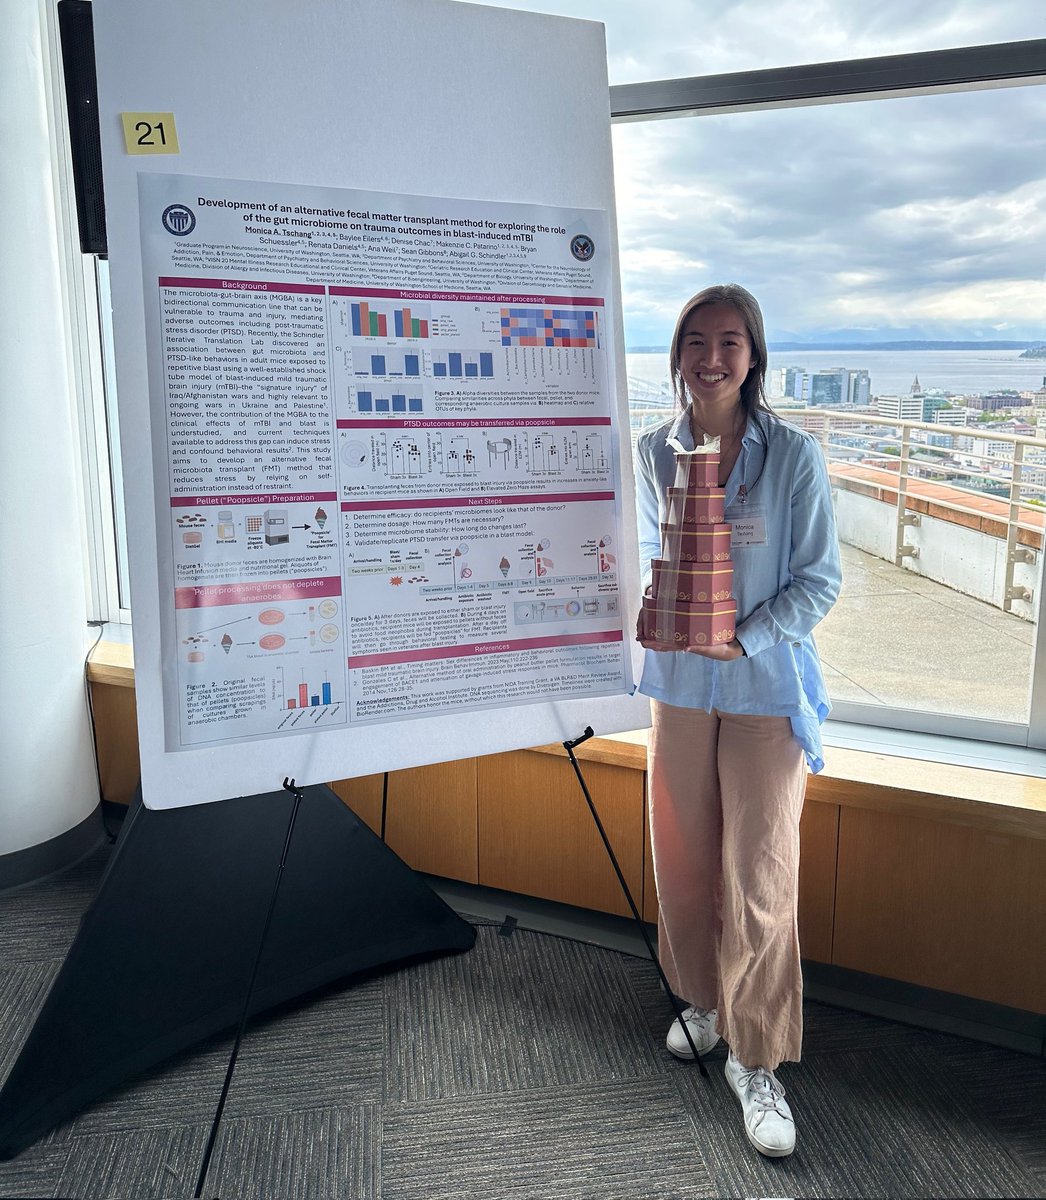 Will present posters for food 🍫 Grateful to win the “Best Poster as Voted by Peers” Award at the @fredhutch Pathogen Associated Malignancies/Microbiome Research Initiative Joint Retreat! First in-person poster presentation: ✅️ #phd #microbiome